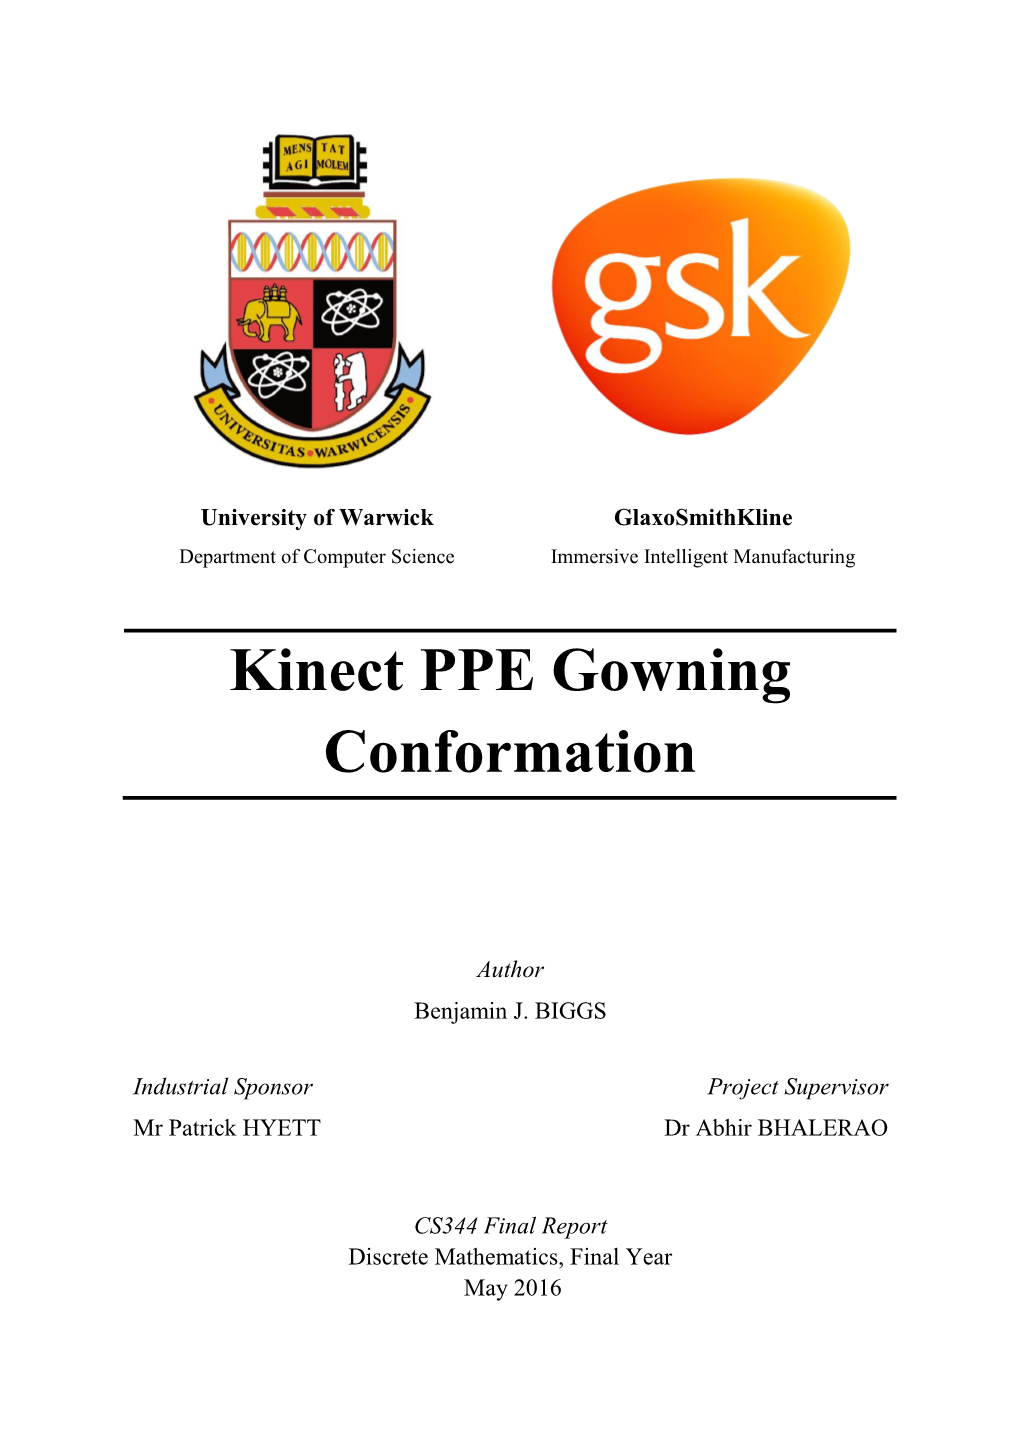 Kinect PPE Gowning Conformation